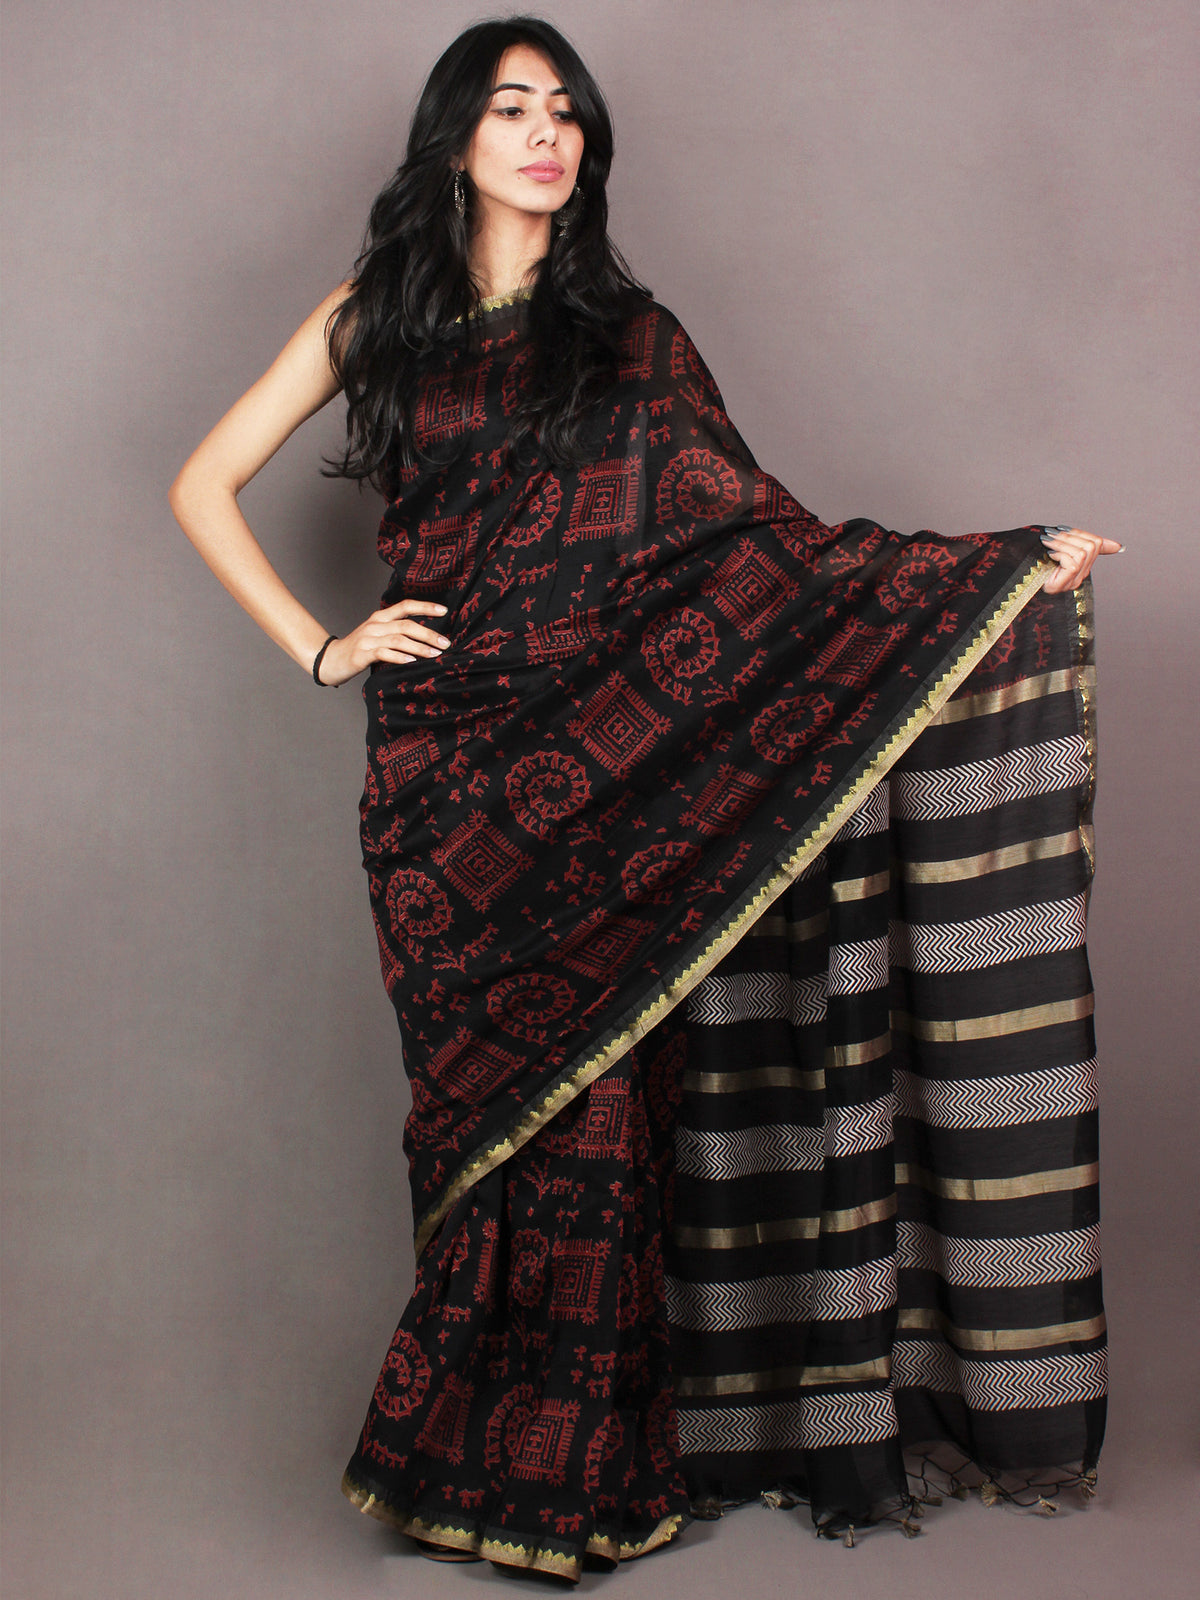 Black Red Hand Block Printed in Natural Colors Chanderi Saree With Geecha Border - S03170857